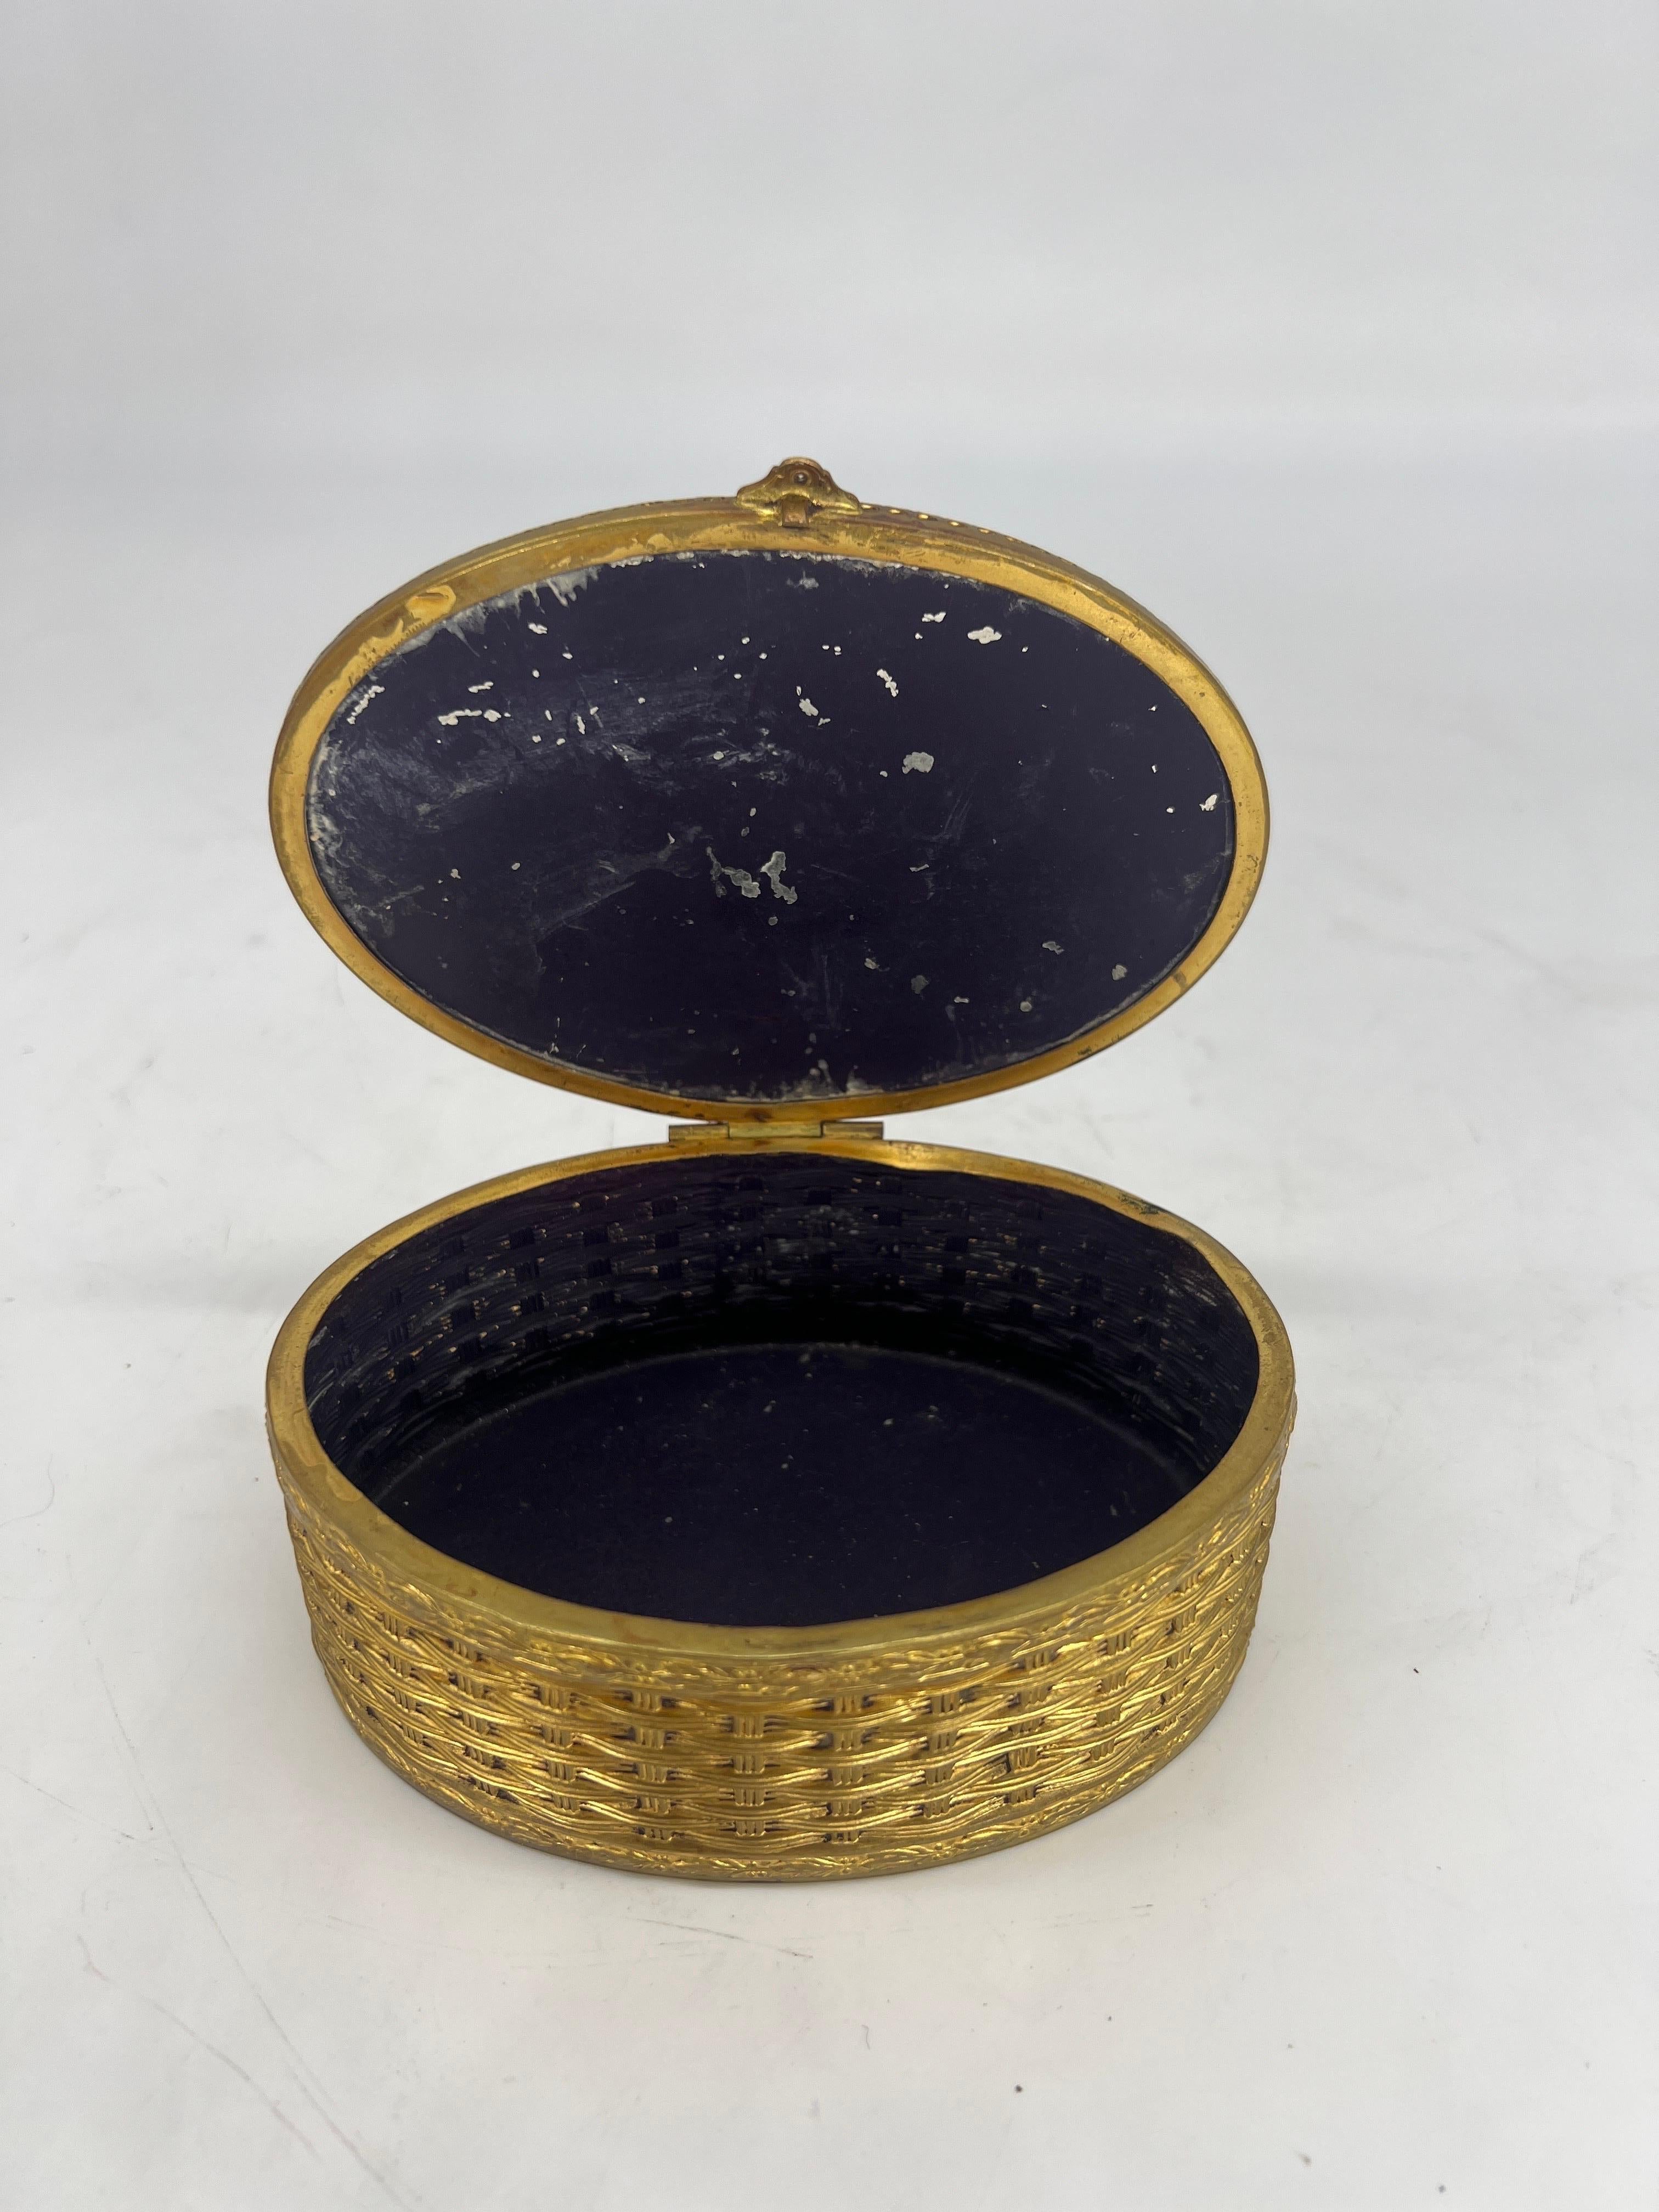 20th Century Antique Continental Basalt & Brass Basketweave Box - Possibly Wedgwood For Sale